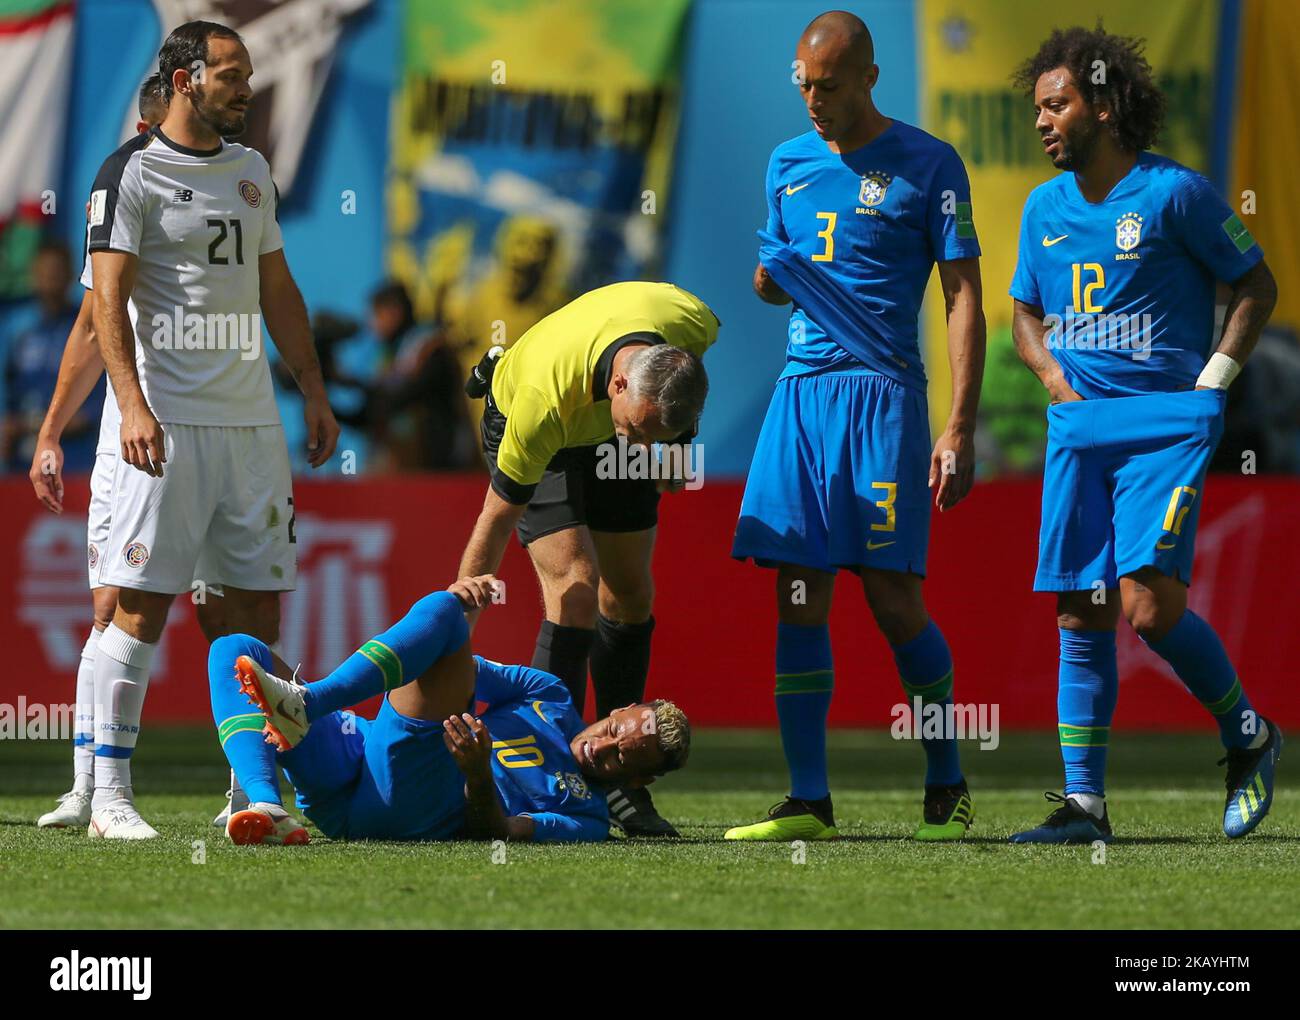 Marcos Urena of the Costa Rica national football team and Neymar, Miranda, Marcelo (L-R) of the Brazil national football team during the 2018 FIFA World Cup match, first stage - Group E between Brazil and Costa Rica at Saint Petersburg Stadium on June 22, 2018 in St. Petersburg, Russia. (Photo by Igor Russak/NurPhoto) Stock Photo